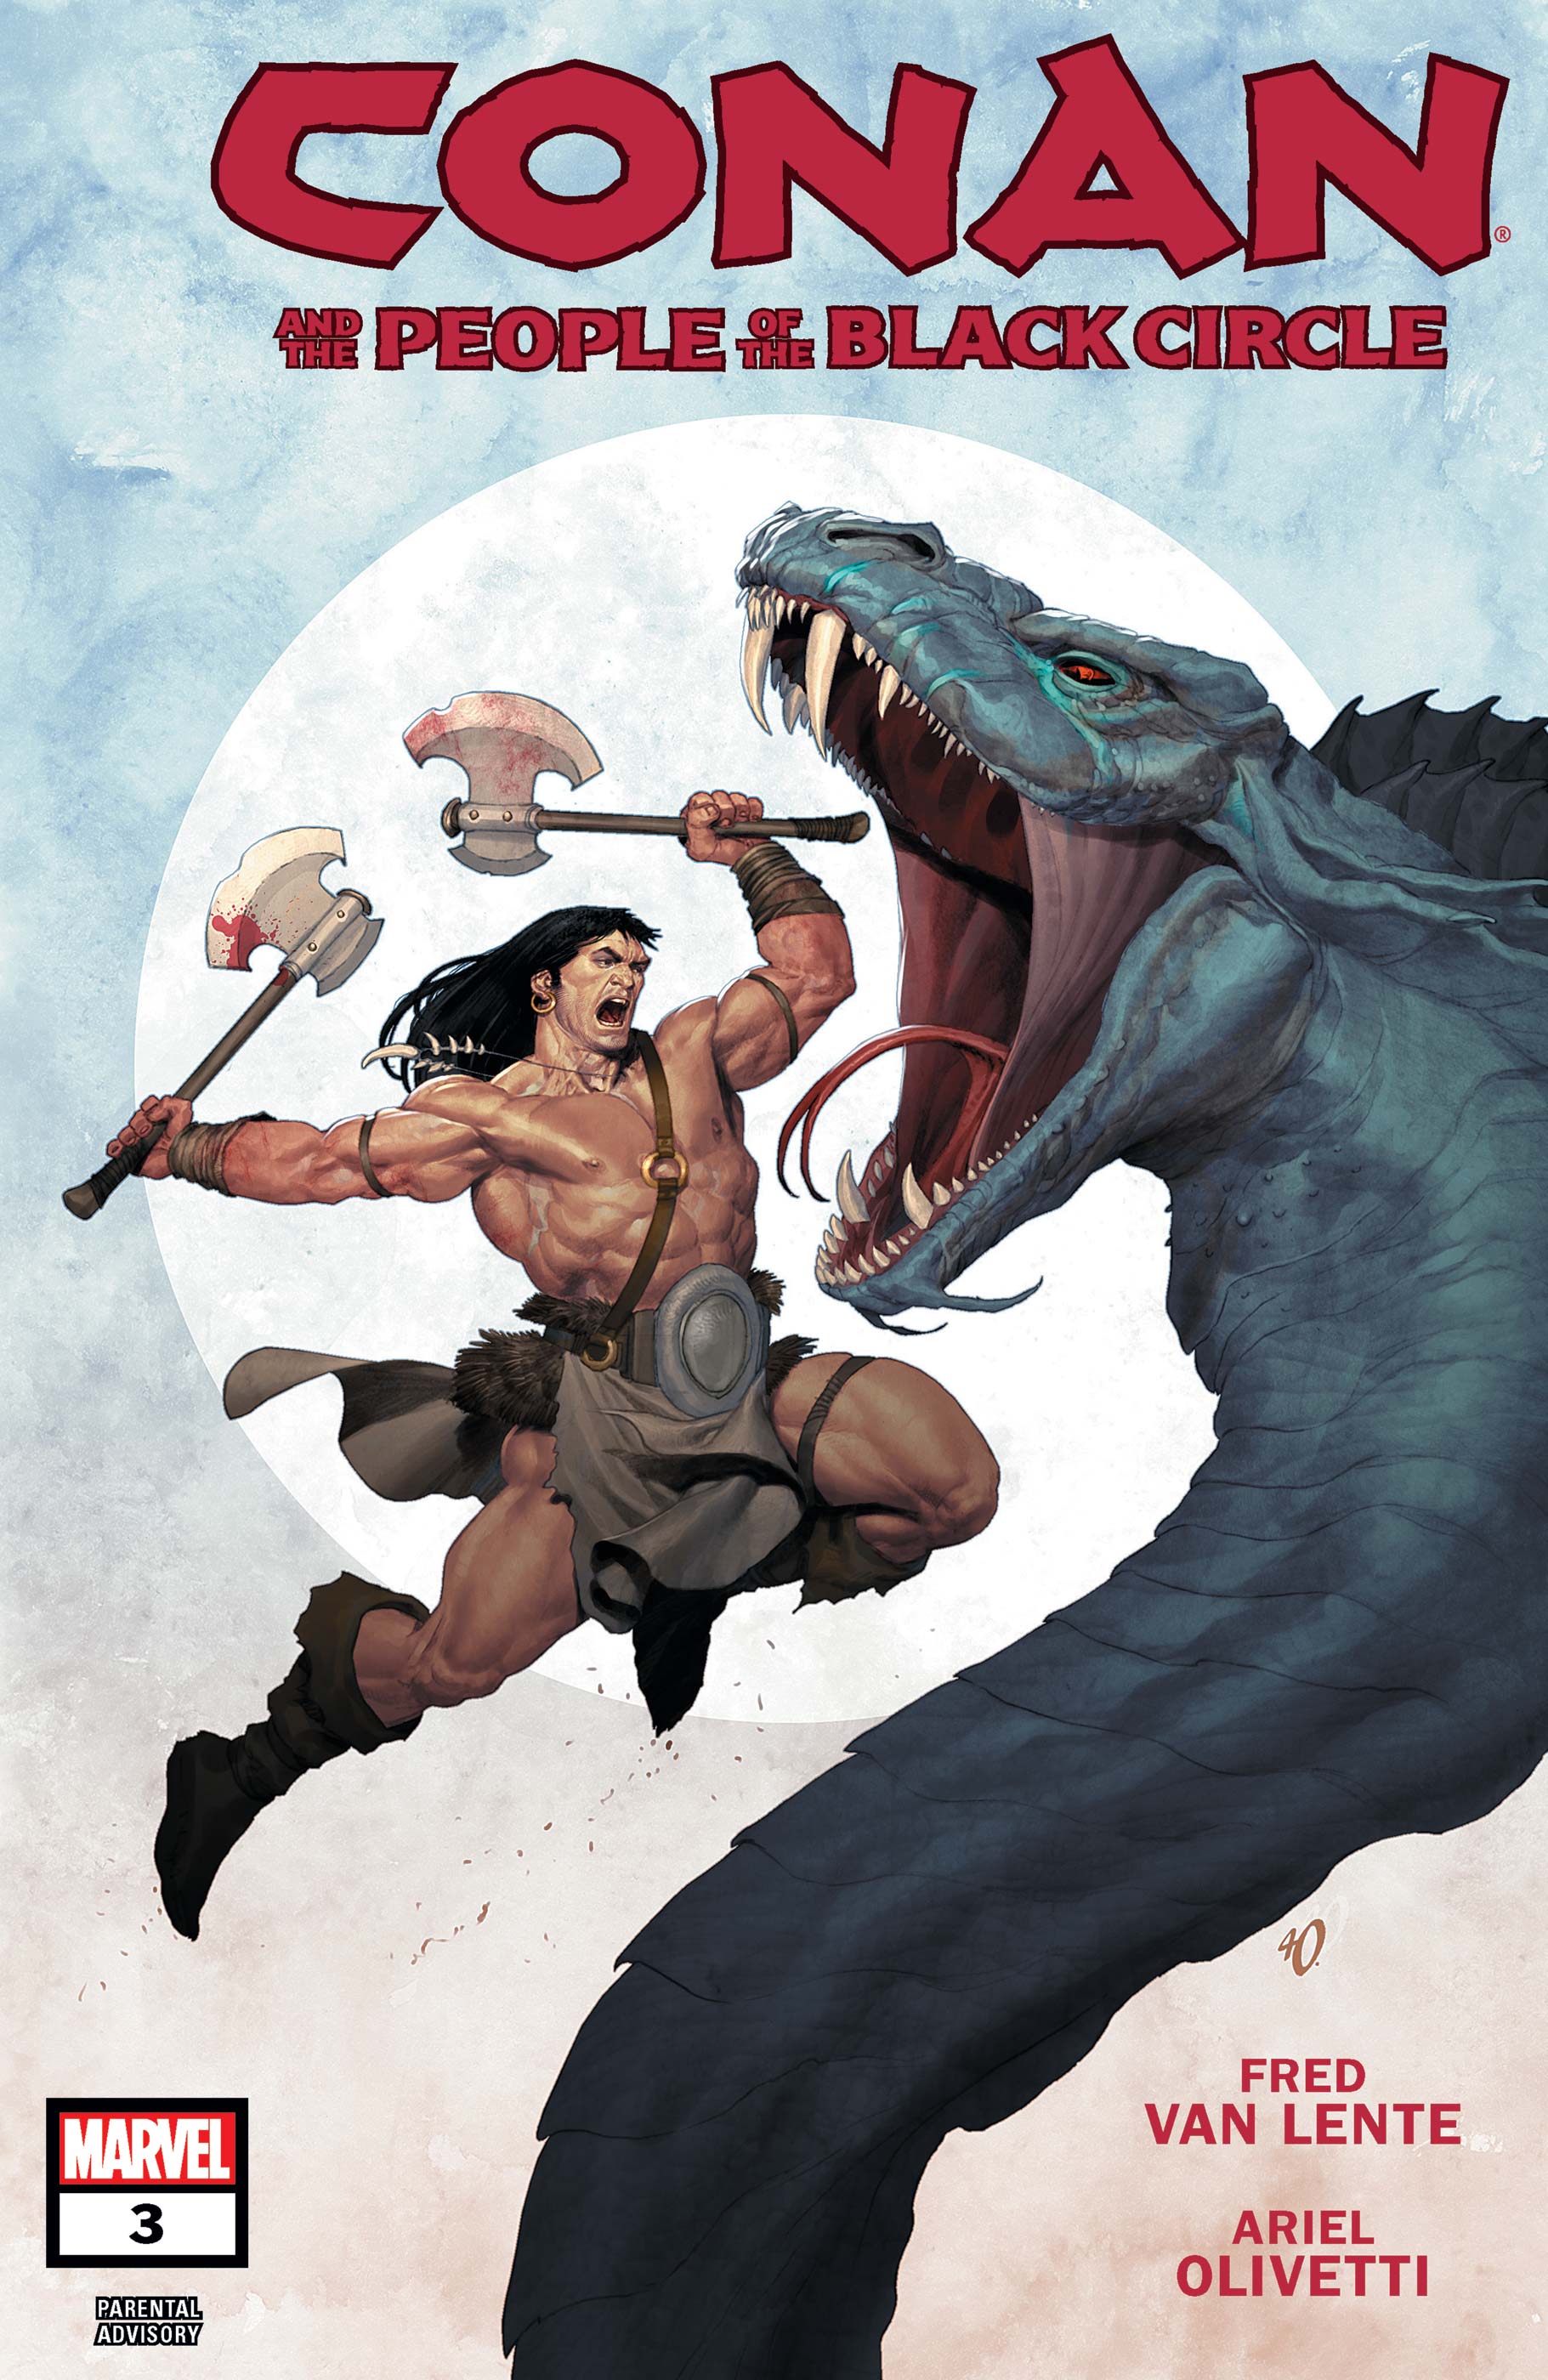 Conan and the People of the Black Circle (2013) #3